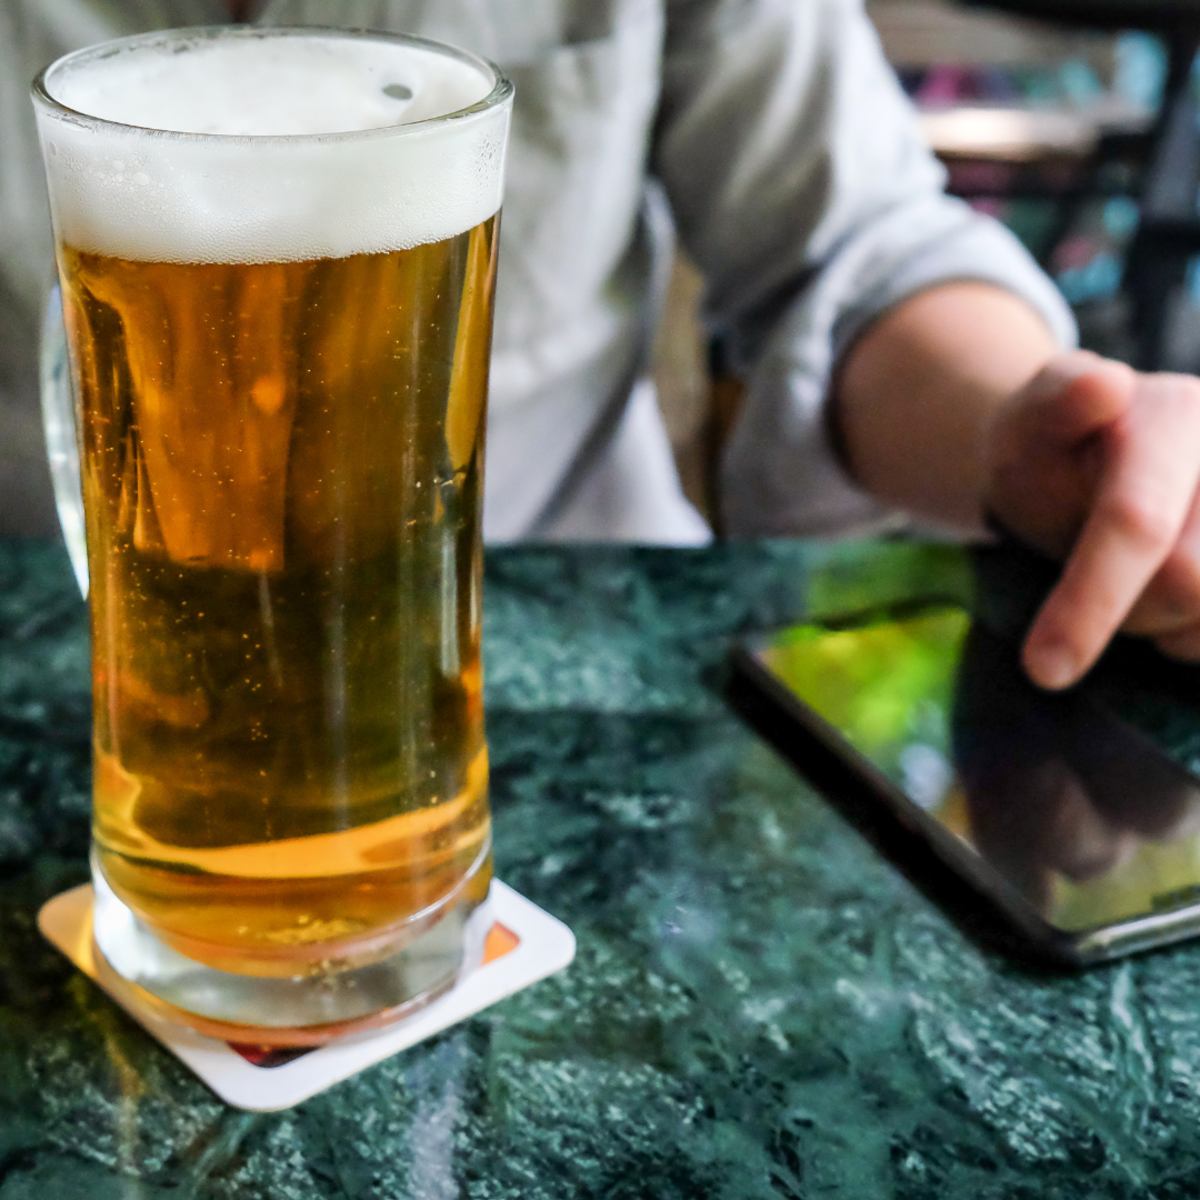 Drunk texting is something nearly everyone has done, although it's not always bad (sometimes a quick "I love you" to a dear friend is appreciated!).